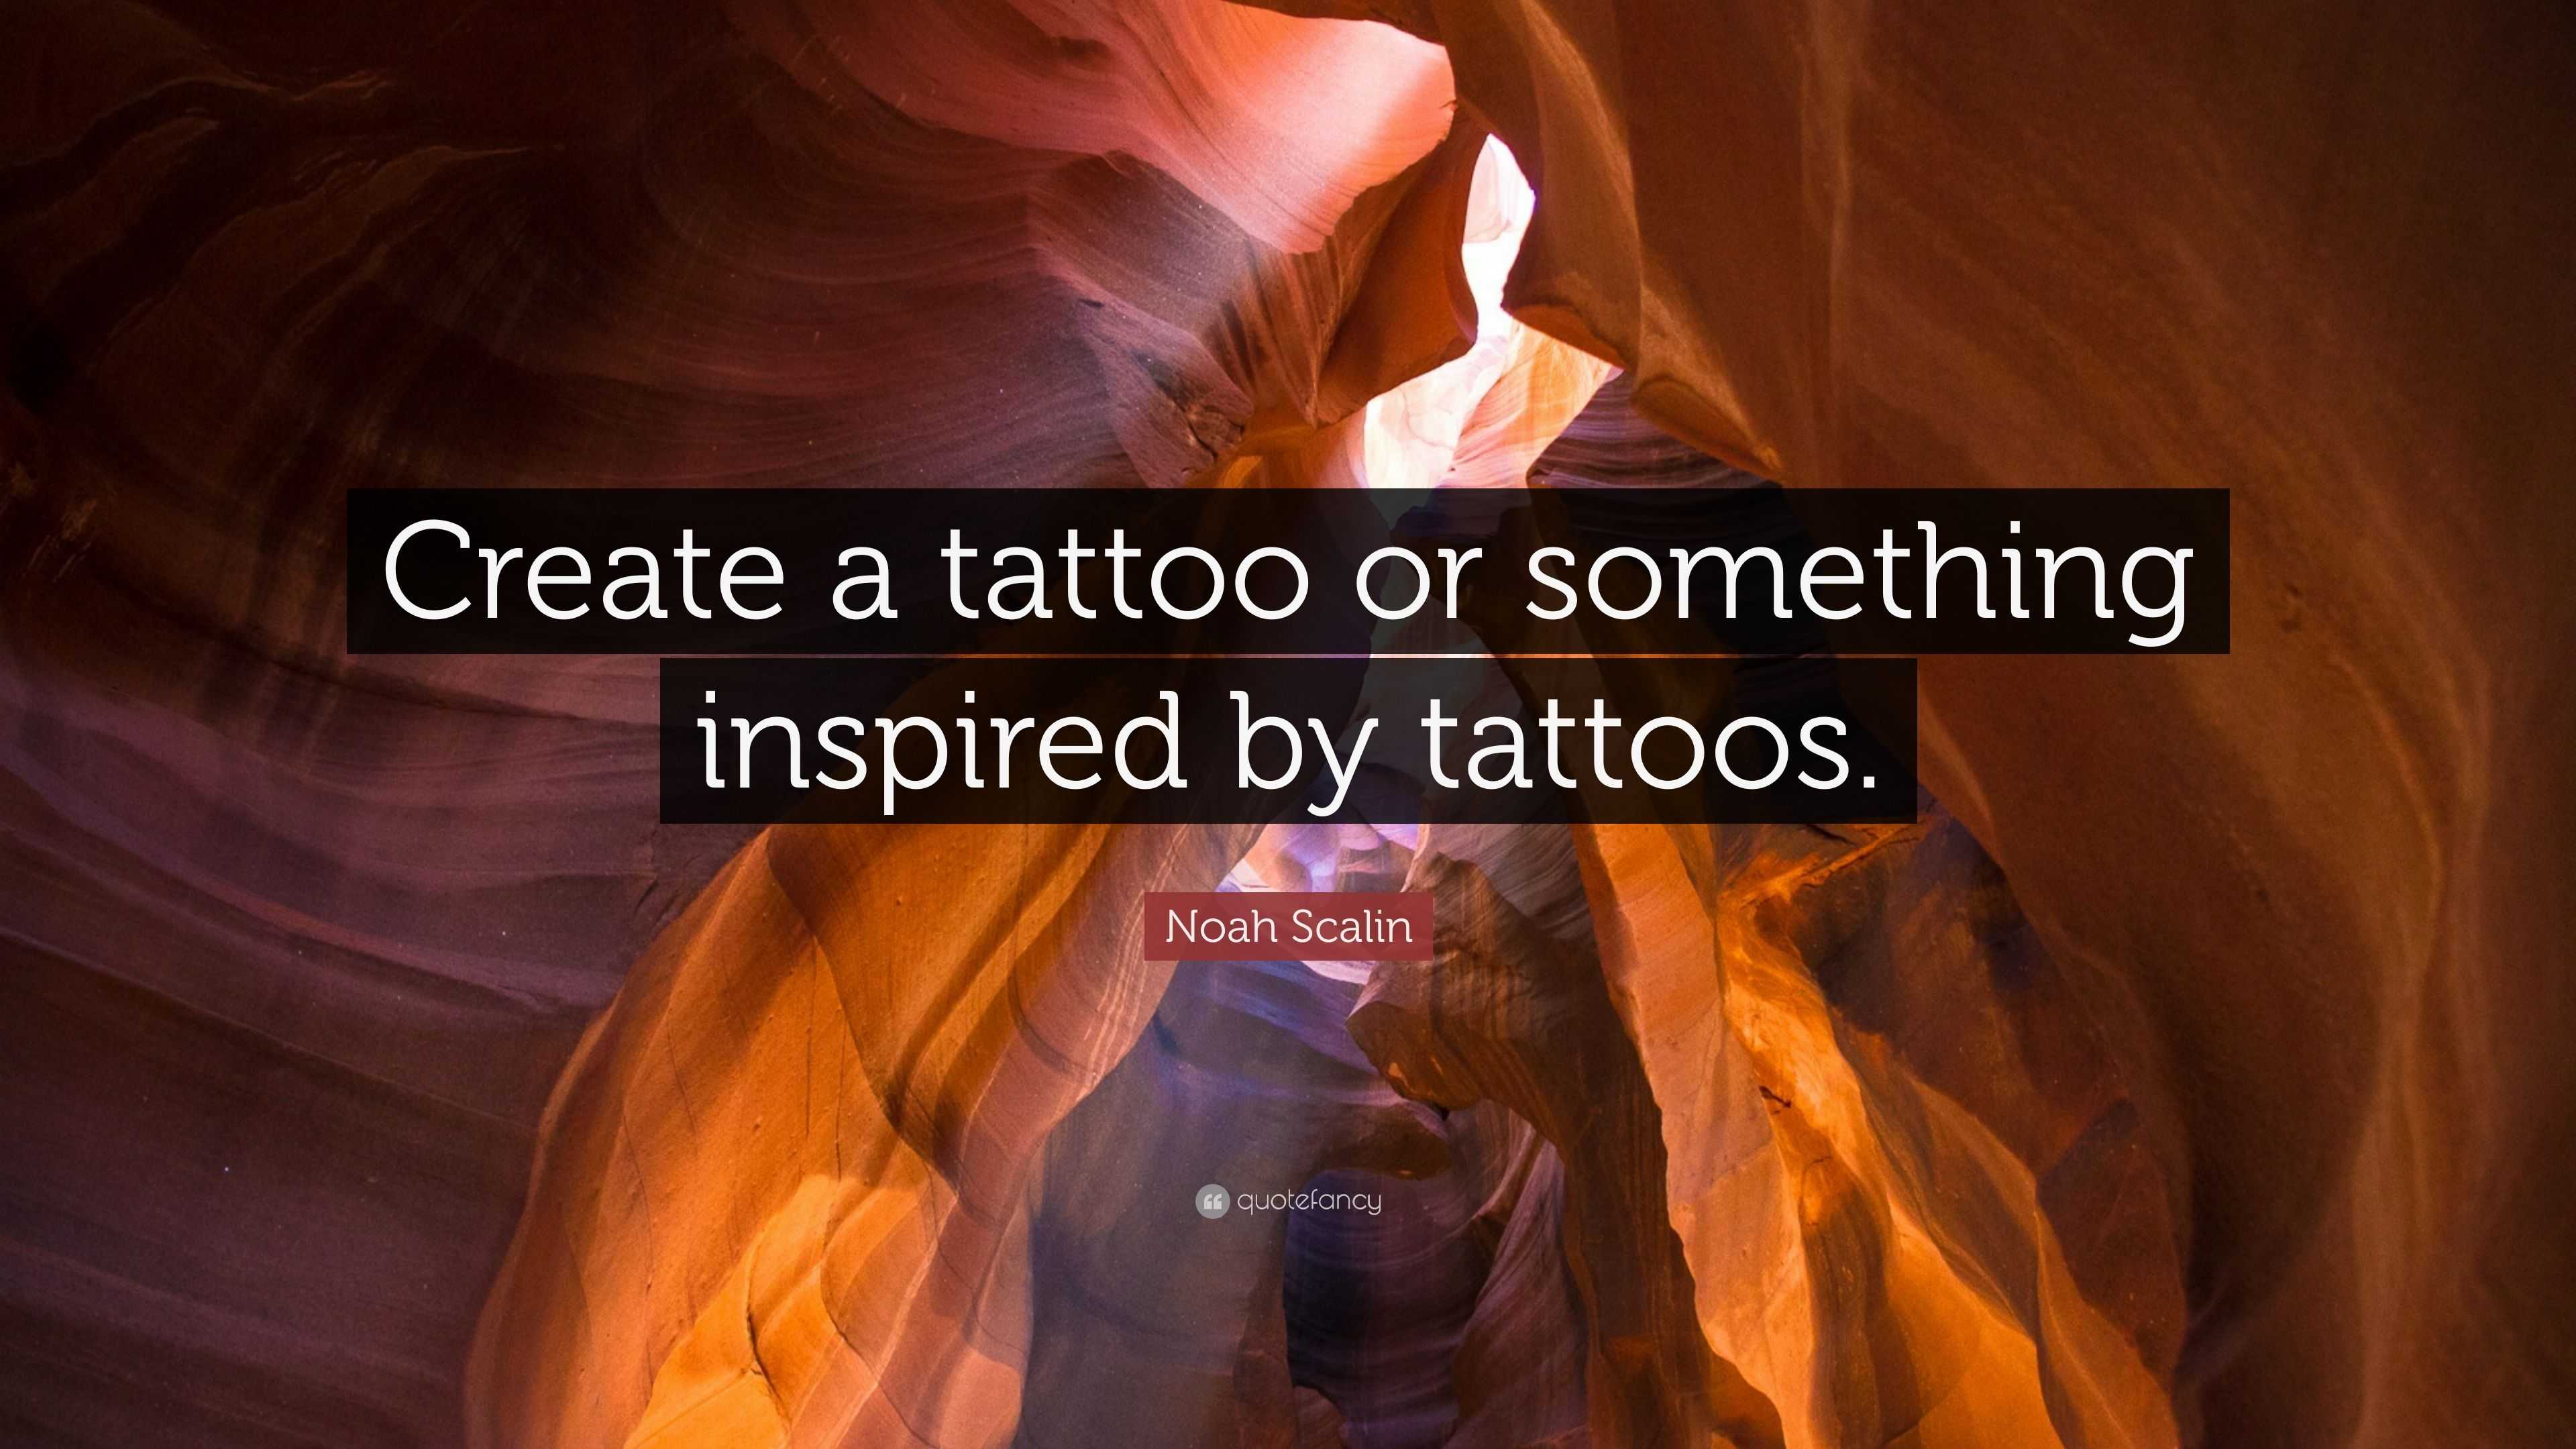 500 Short Inspirational Quotes For Tattoo Ideas | Sarah Scoop